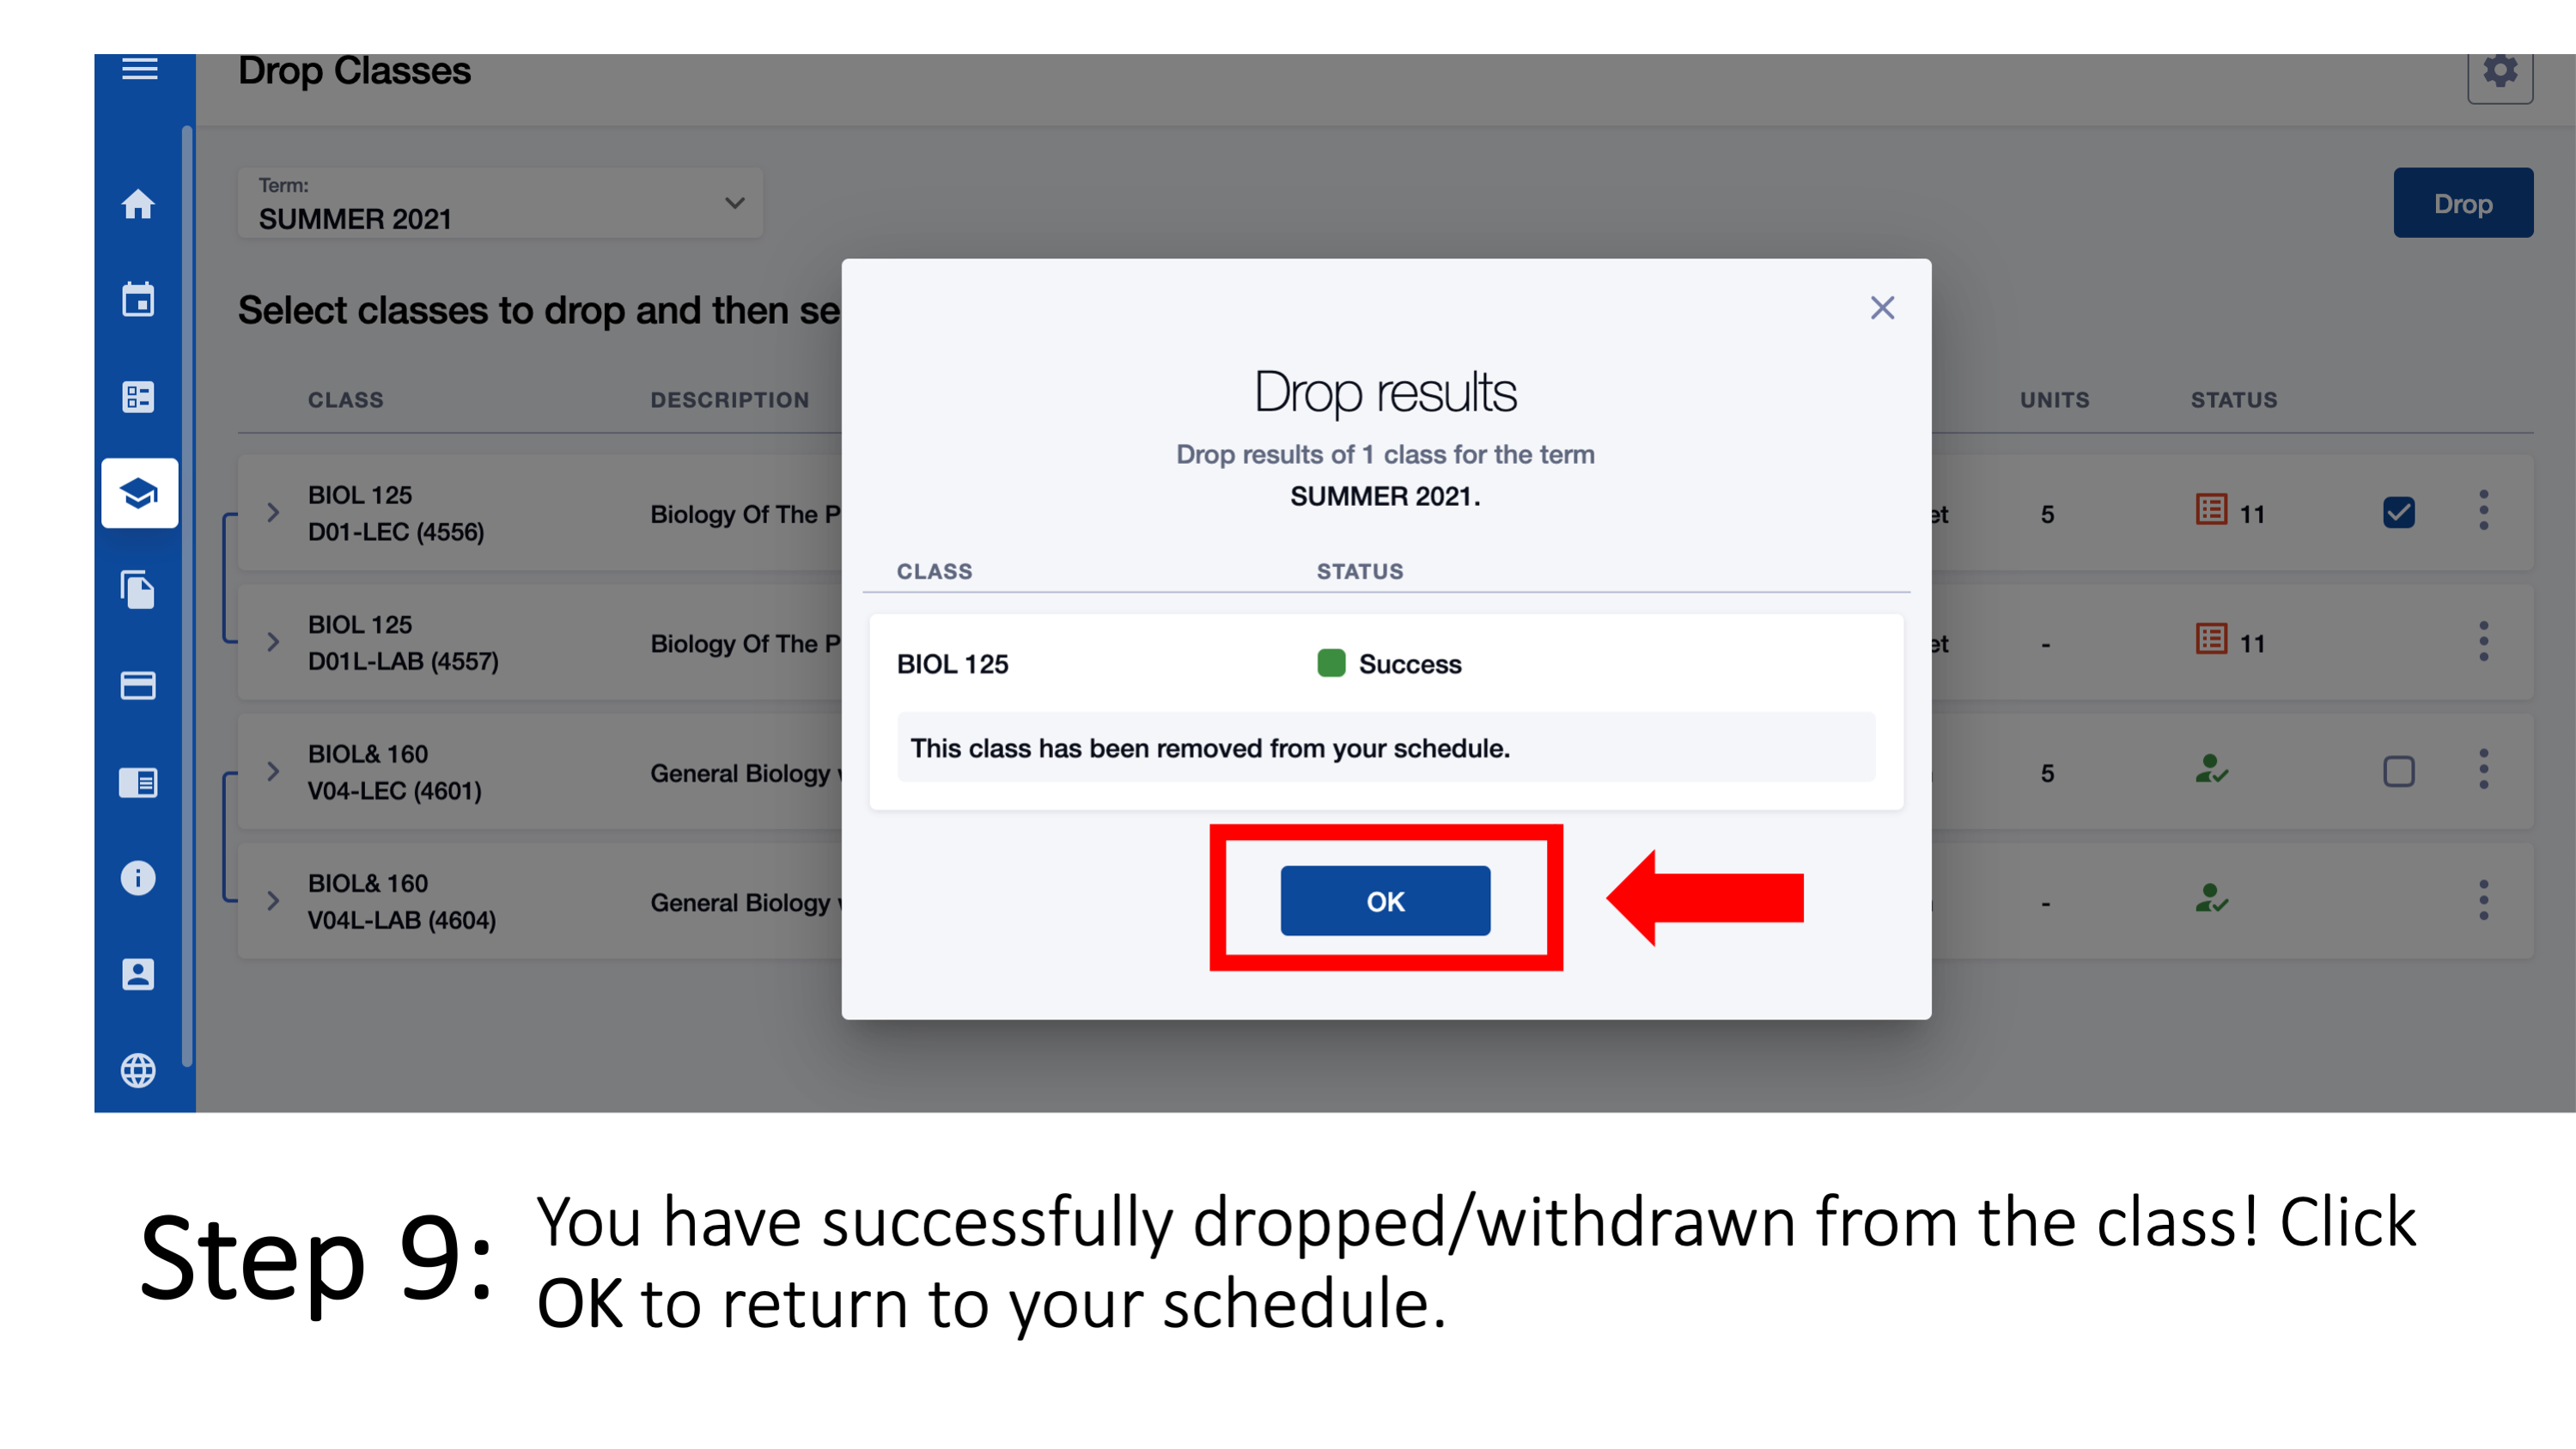 Step 9: You have successfully dropped/withdrawn from the class! Click OK to return to your schedule.